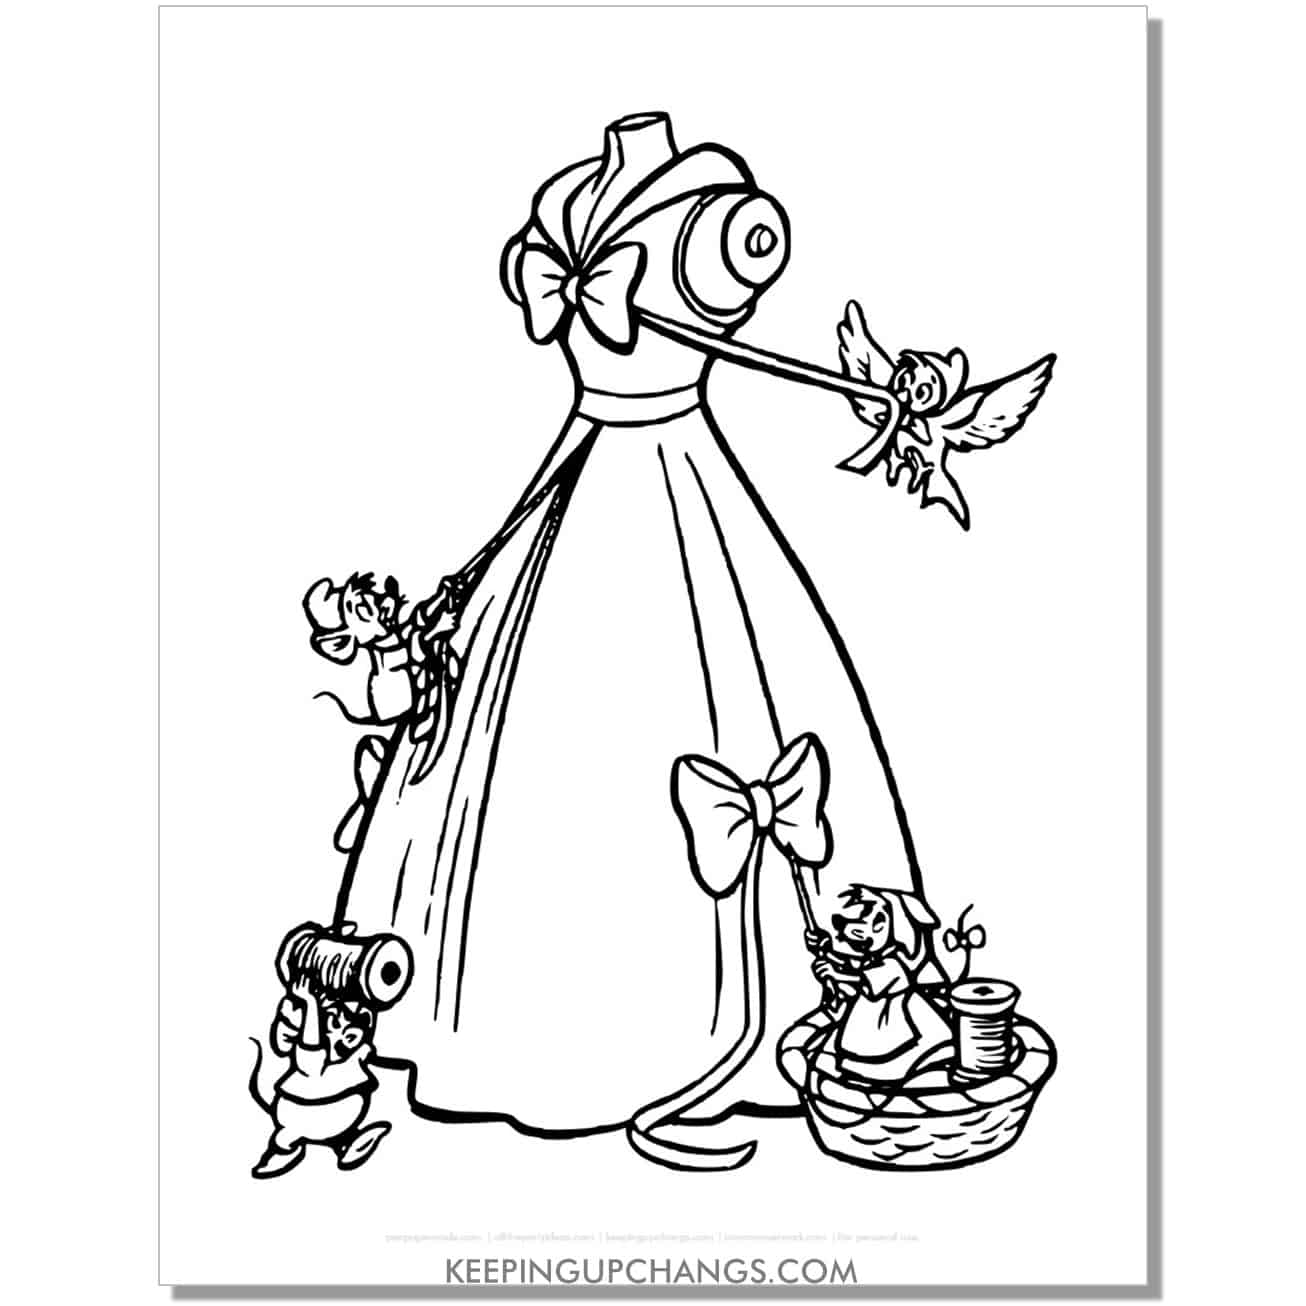 birds and mice make dress for cinderella coloring page, sheet.